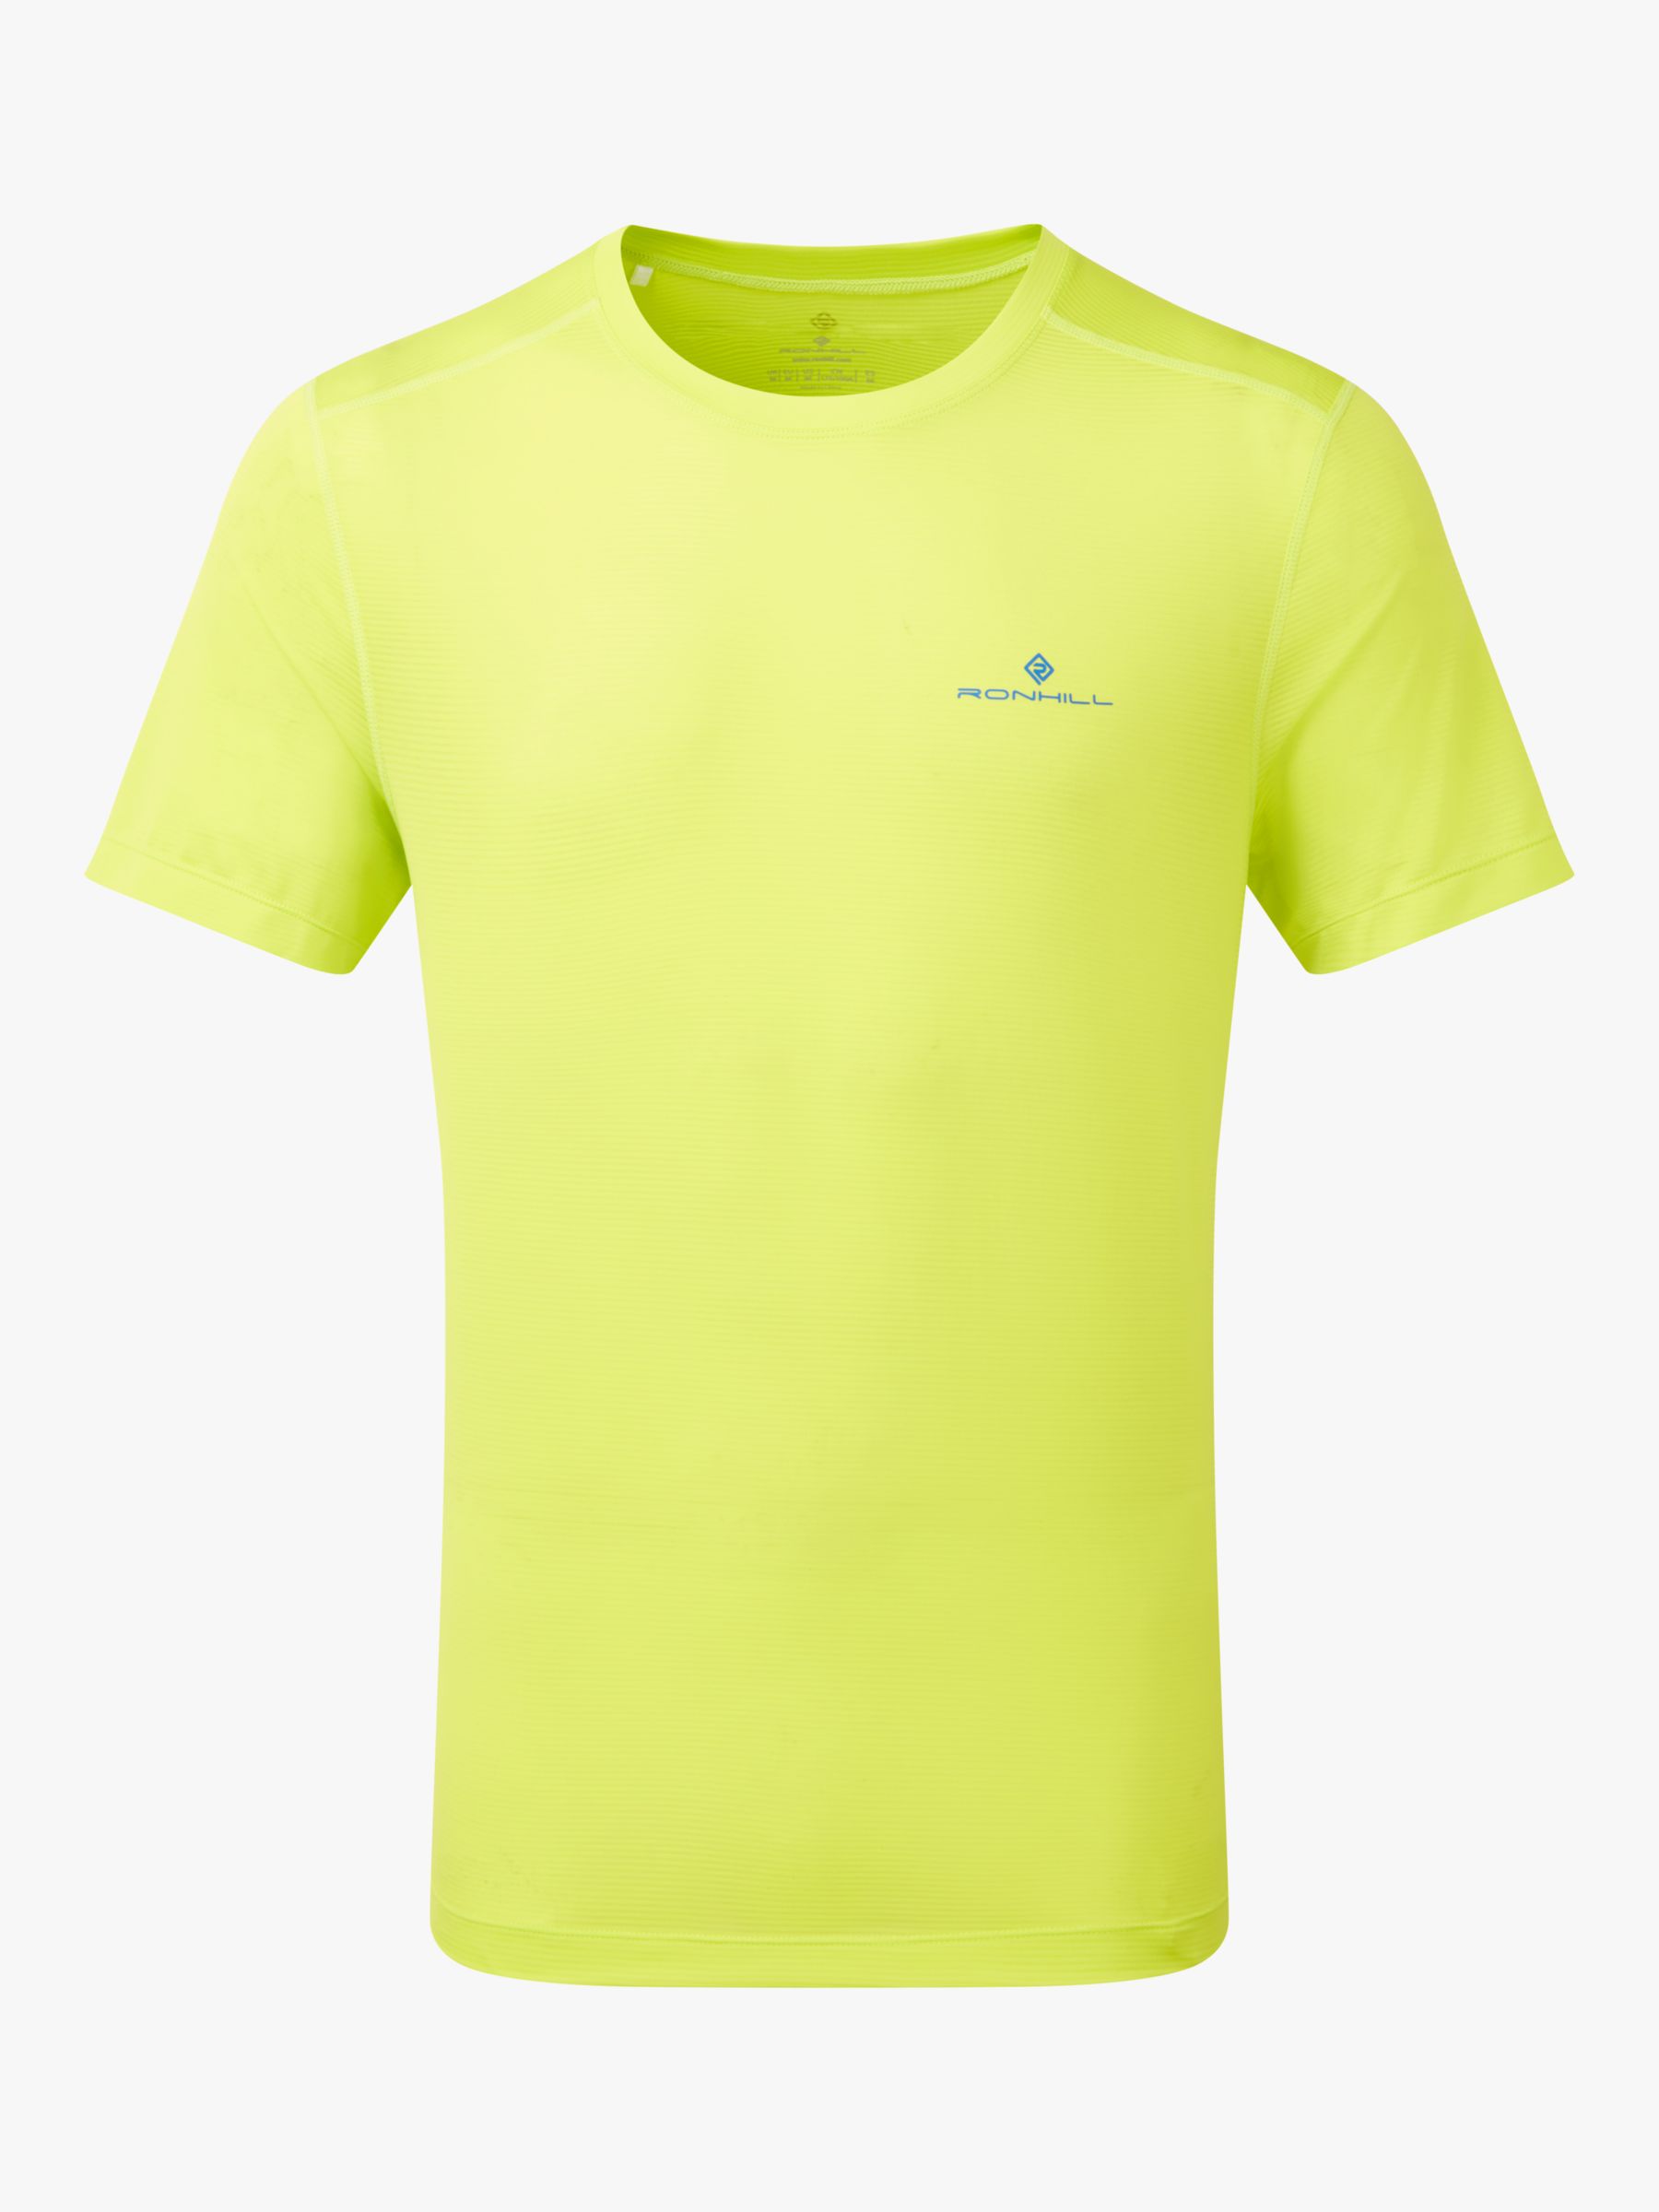 Ronhill Sports Top, Yellow, S